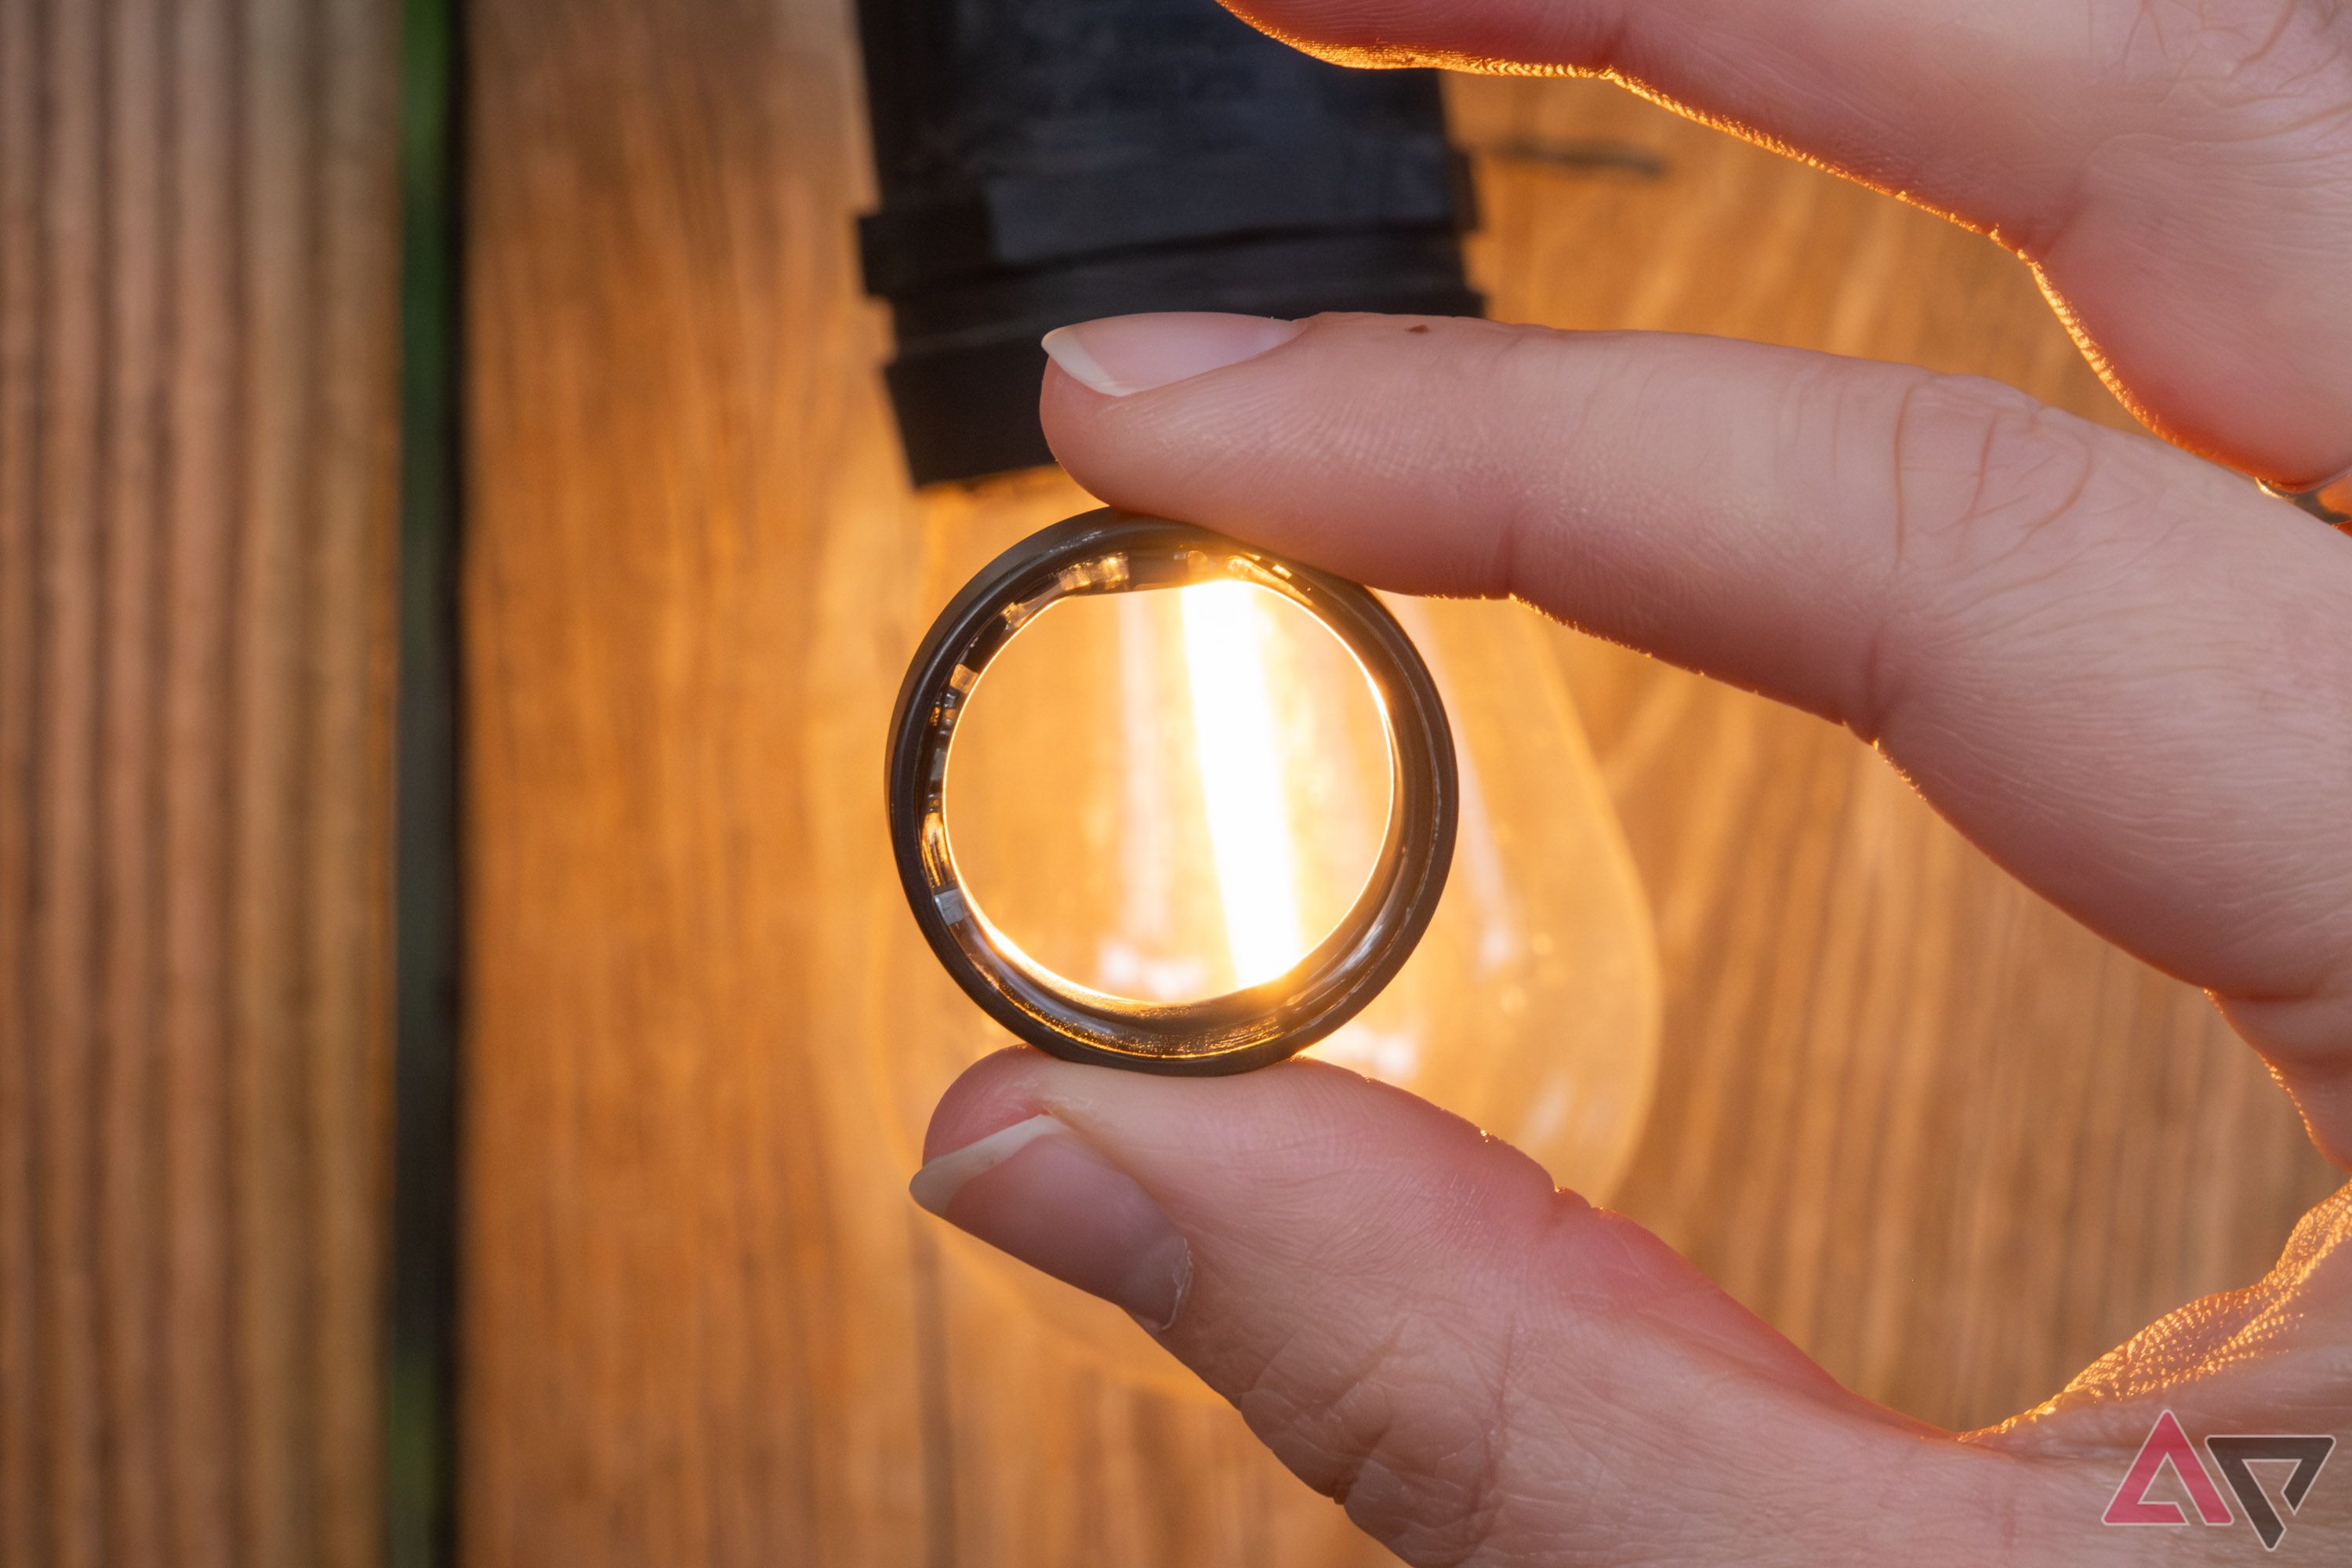 Oura, beware! Ultrahuman launches lightest smart ring on the market